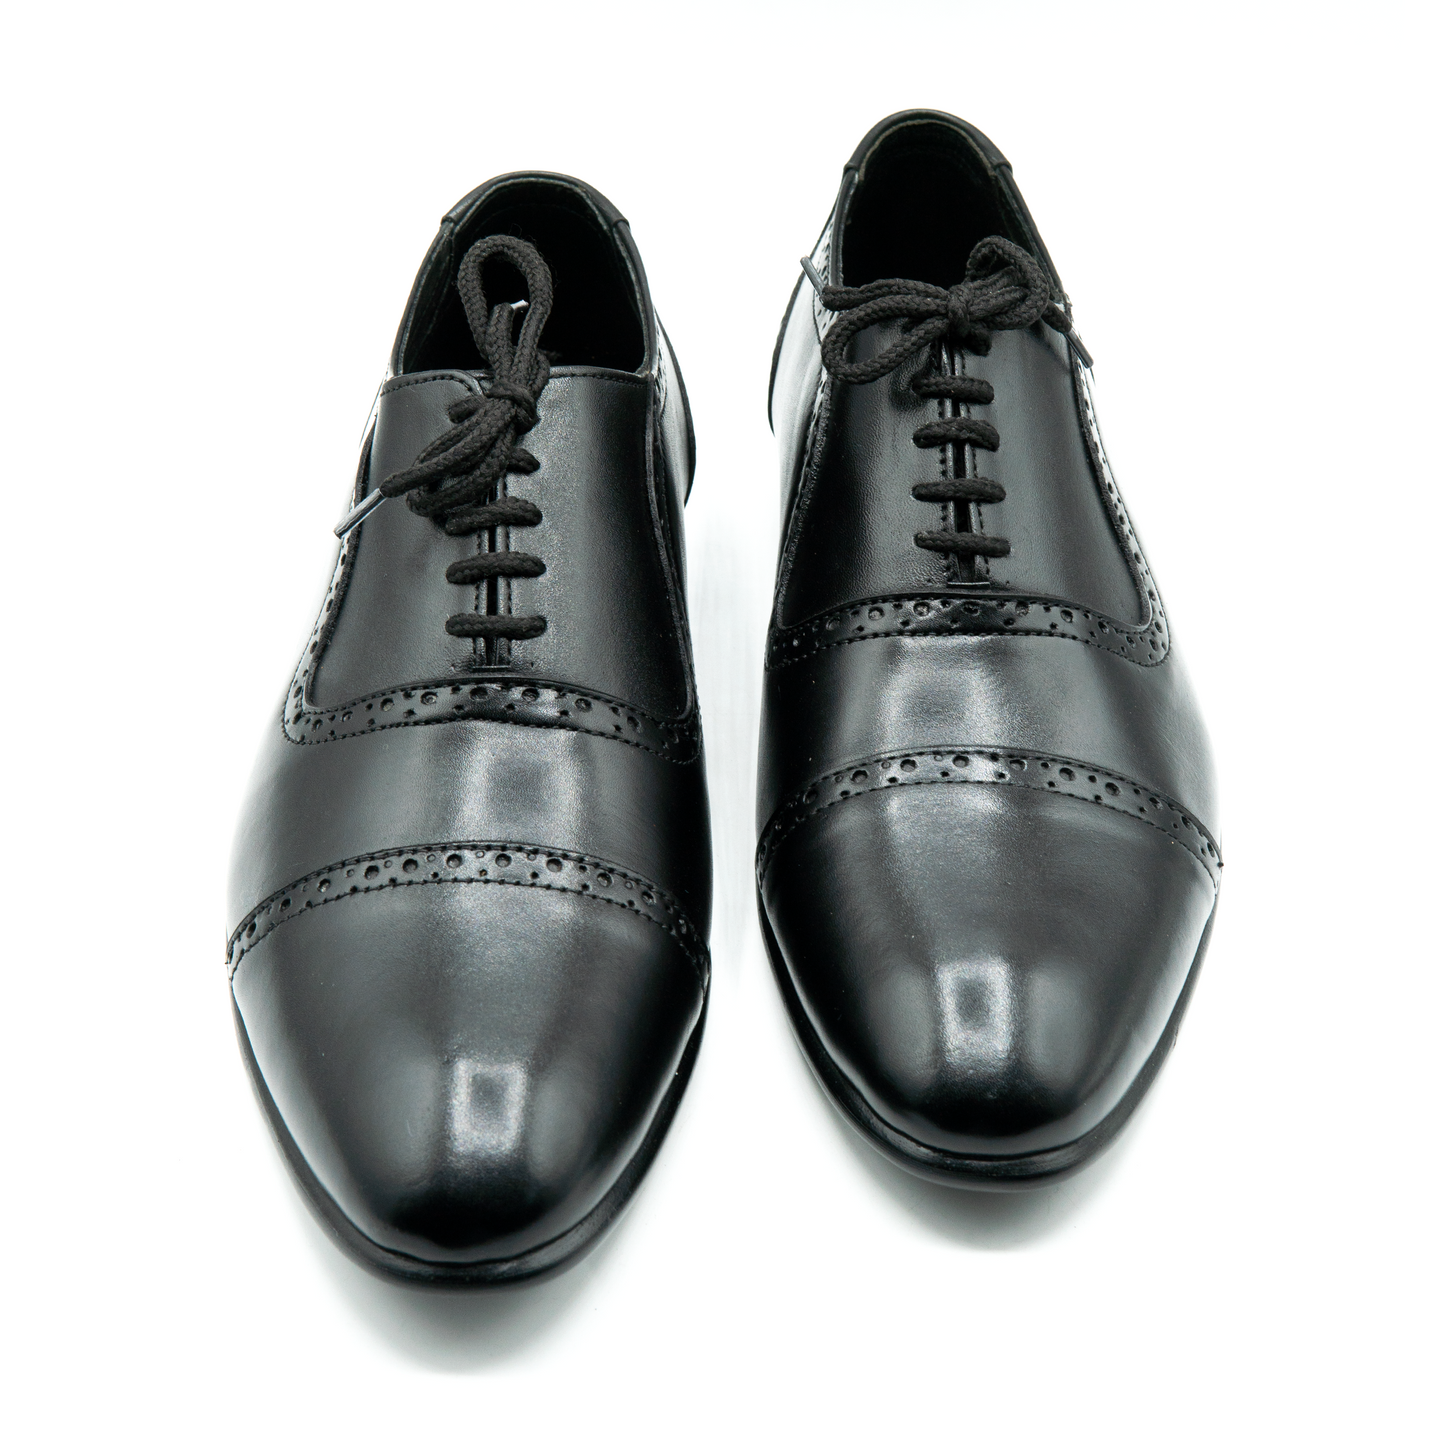 Black Leather Brogues Executive Shoes